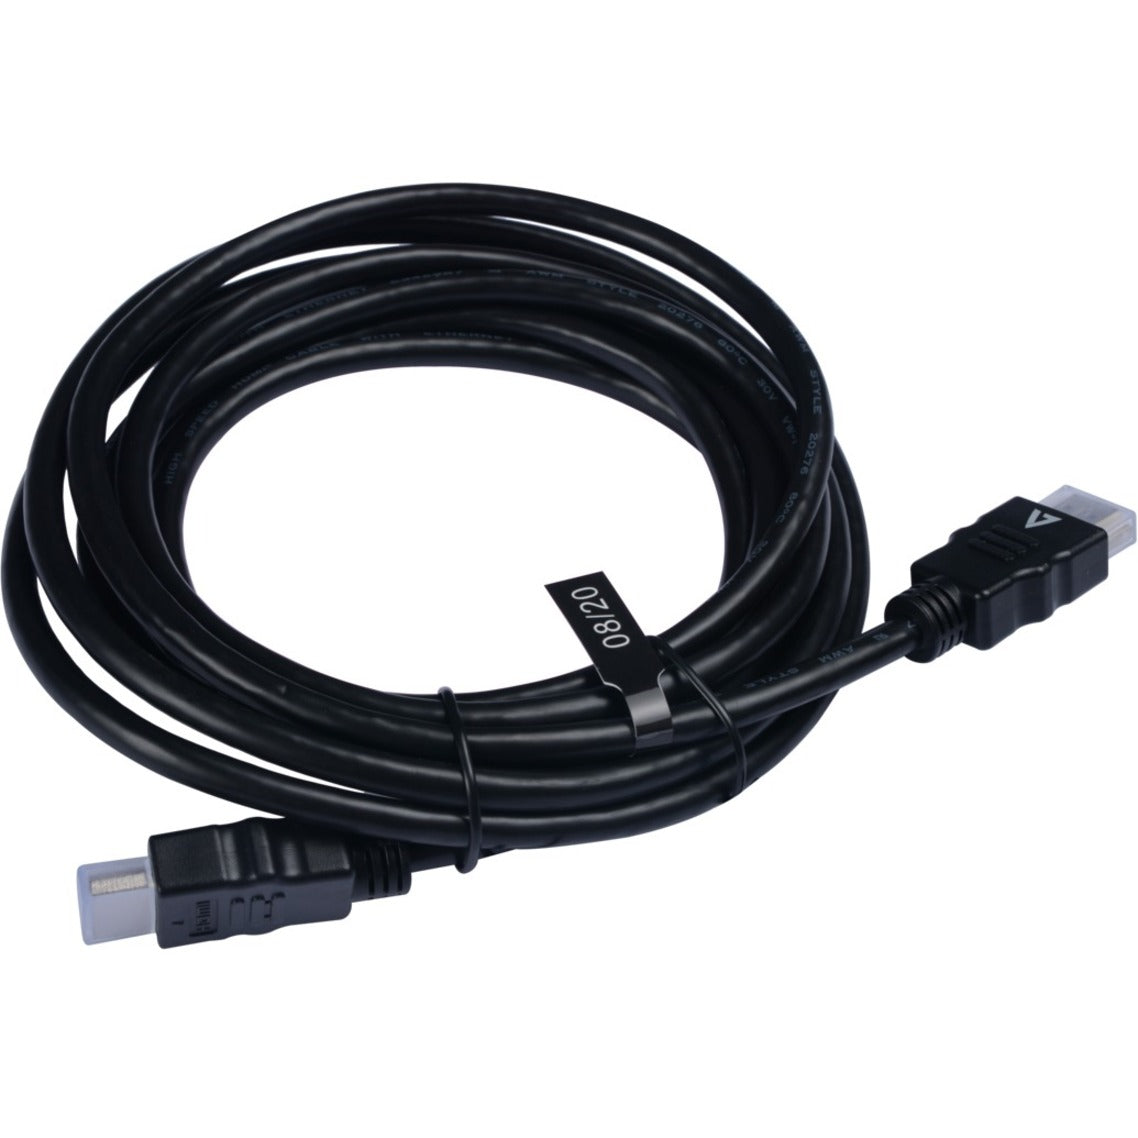 V7 Black Video Cable HDMI Male to HDMI Male 3m 10ft